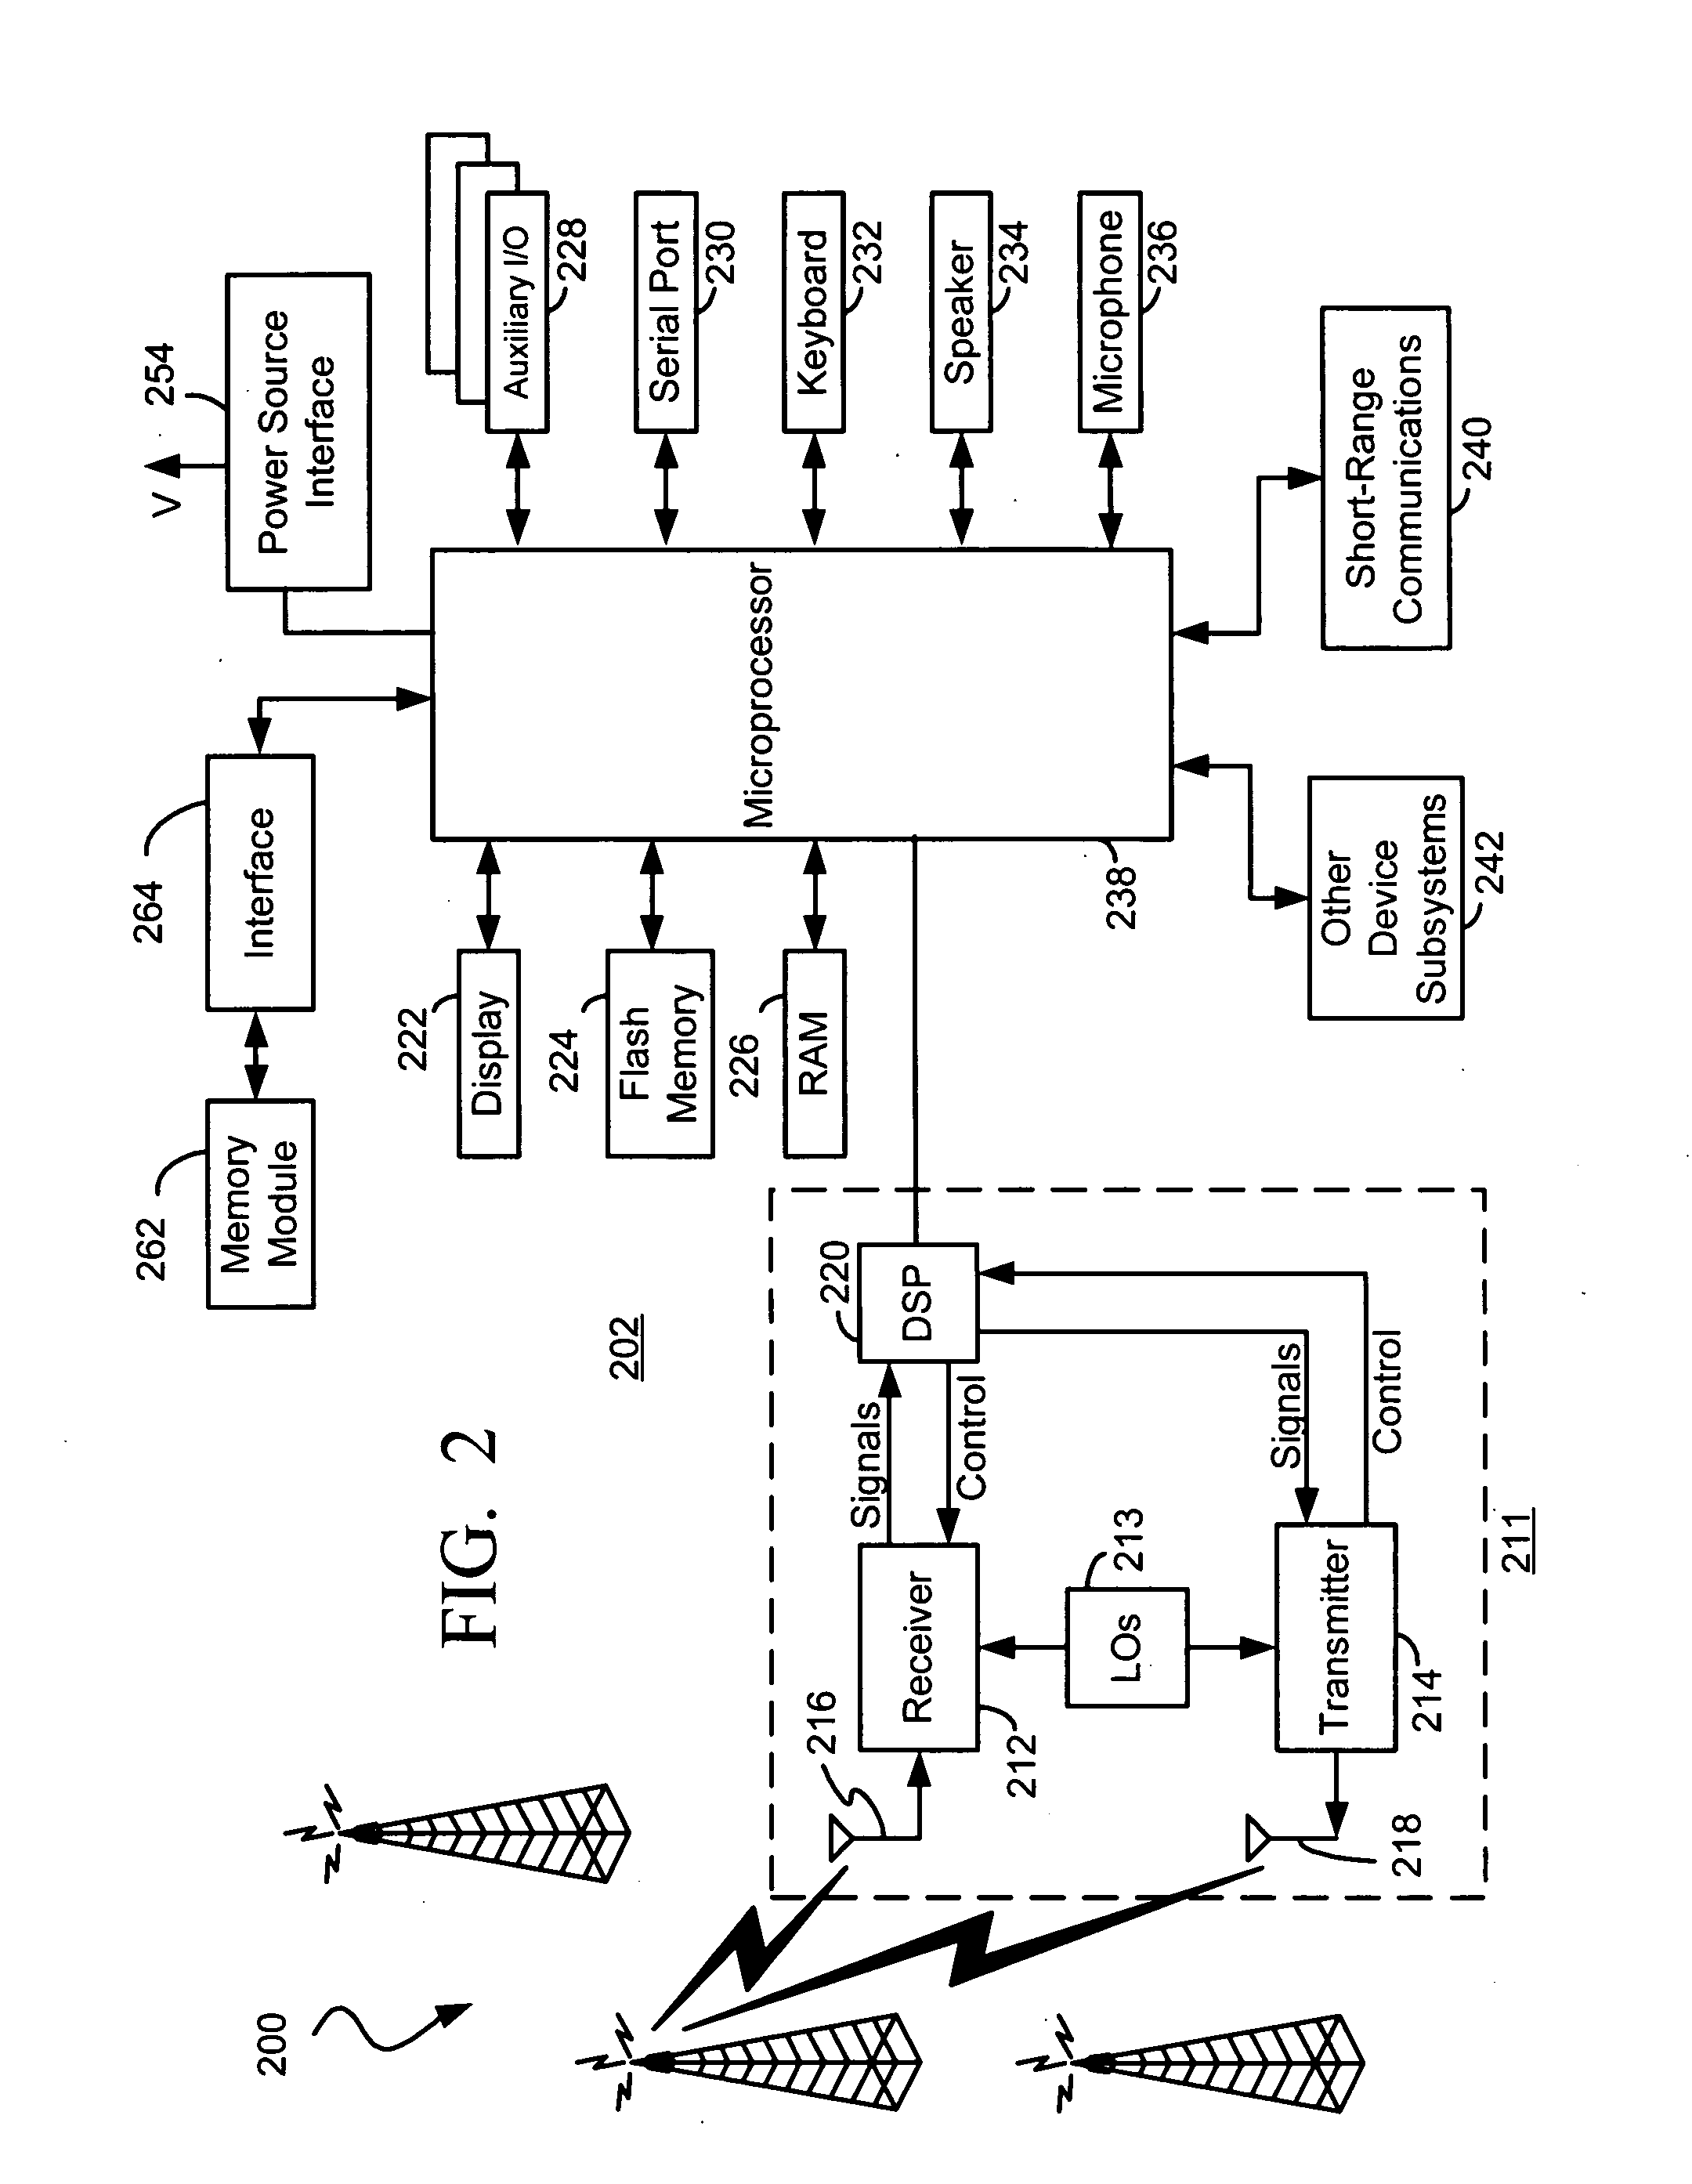 Methods and apparatus for providing slot reservations for slotted messages in wireless communication networks